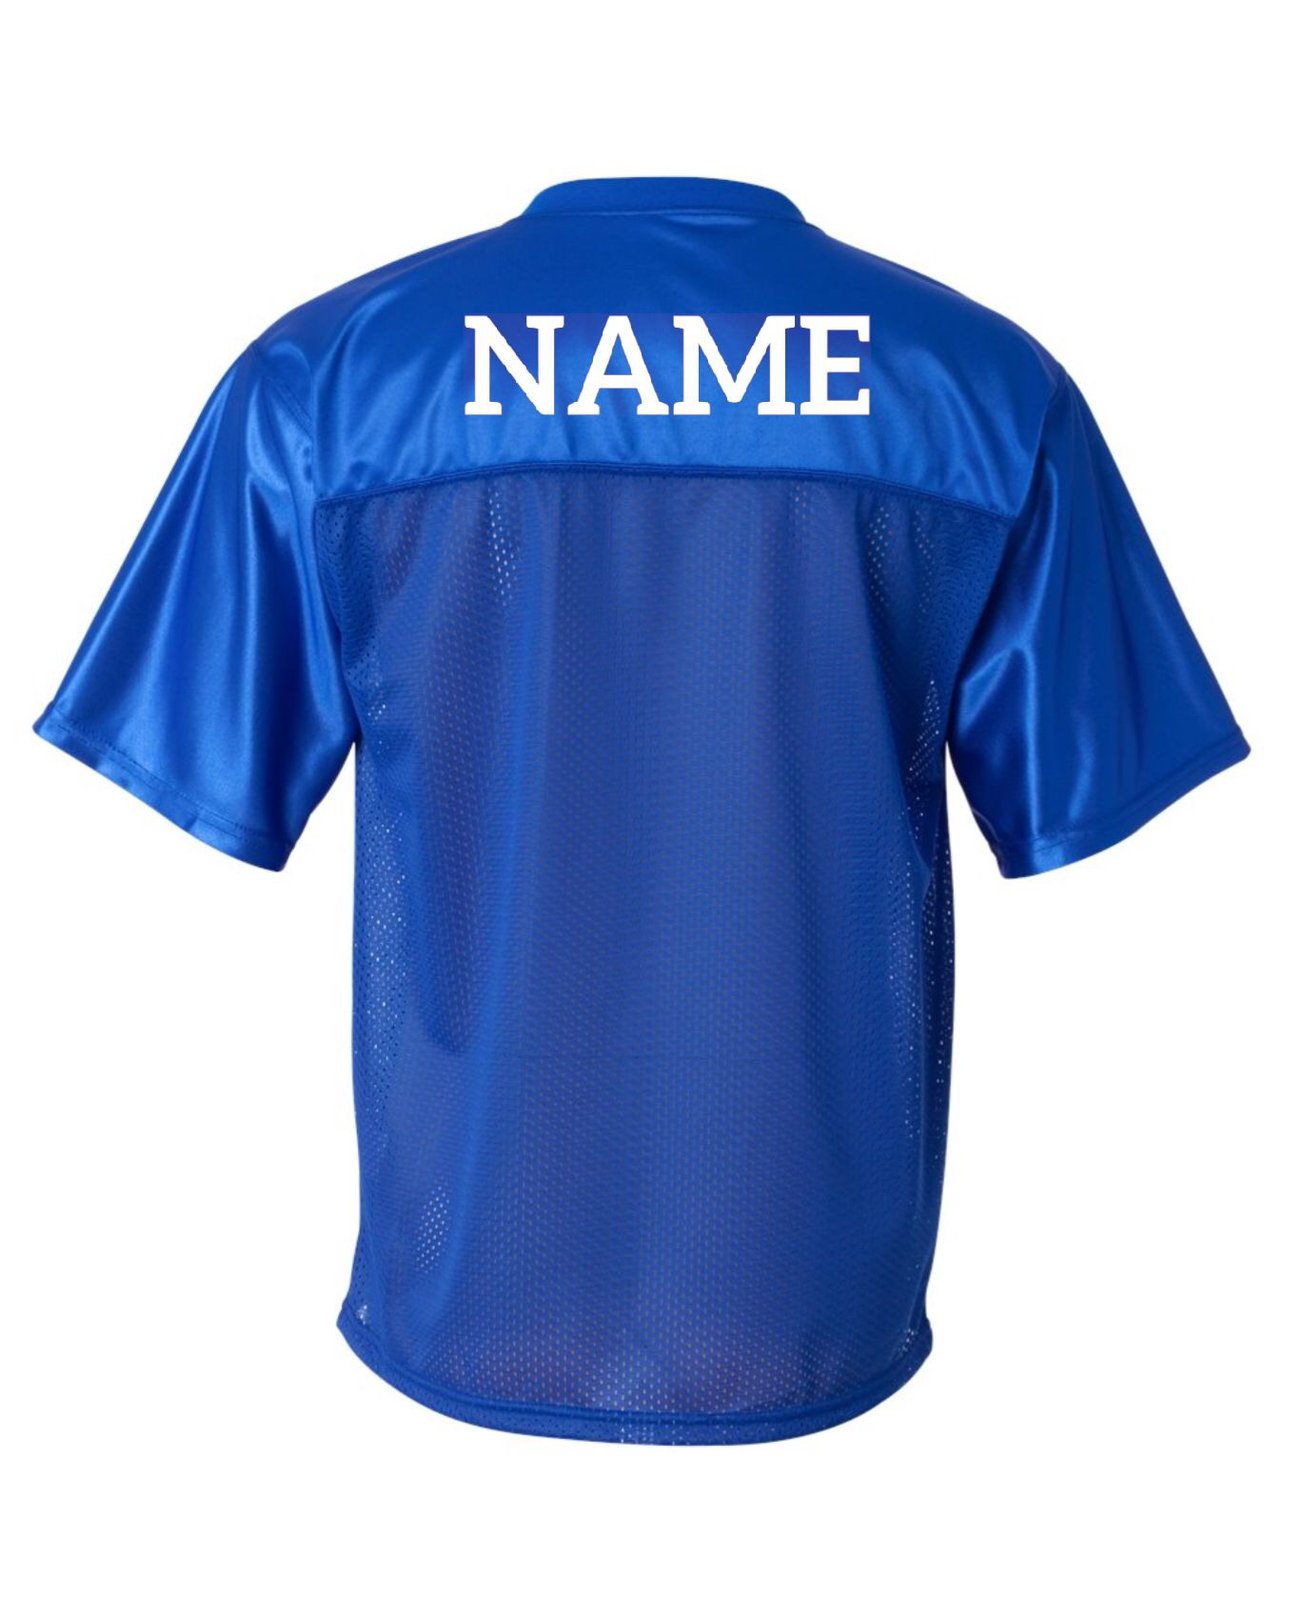 put name on back of jersey